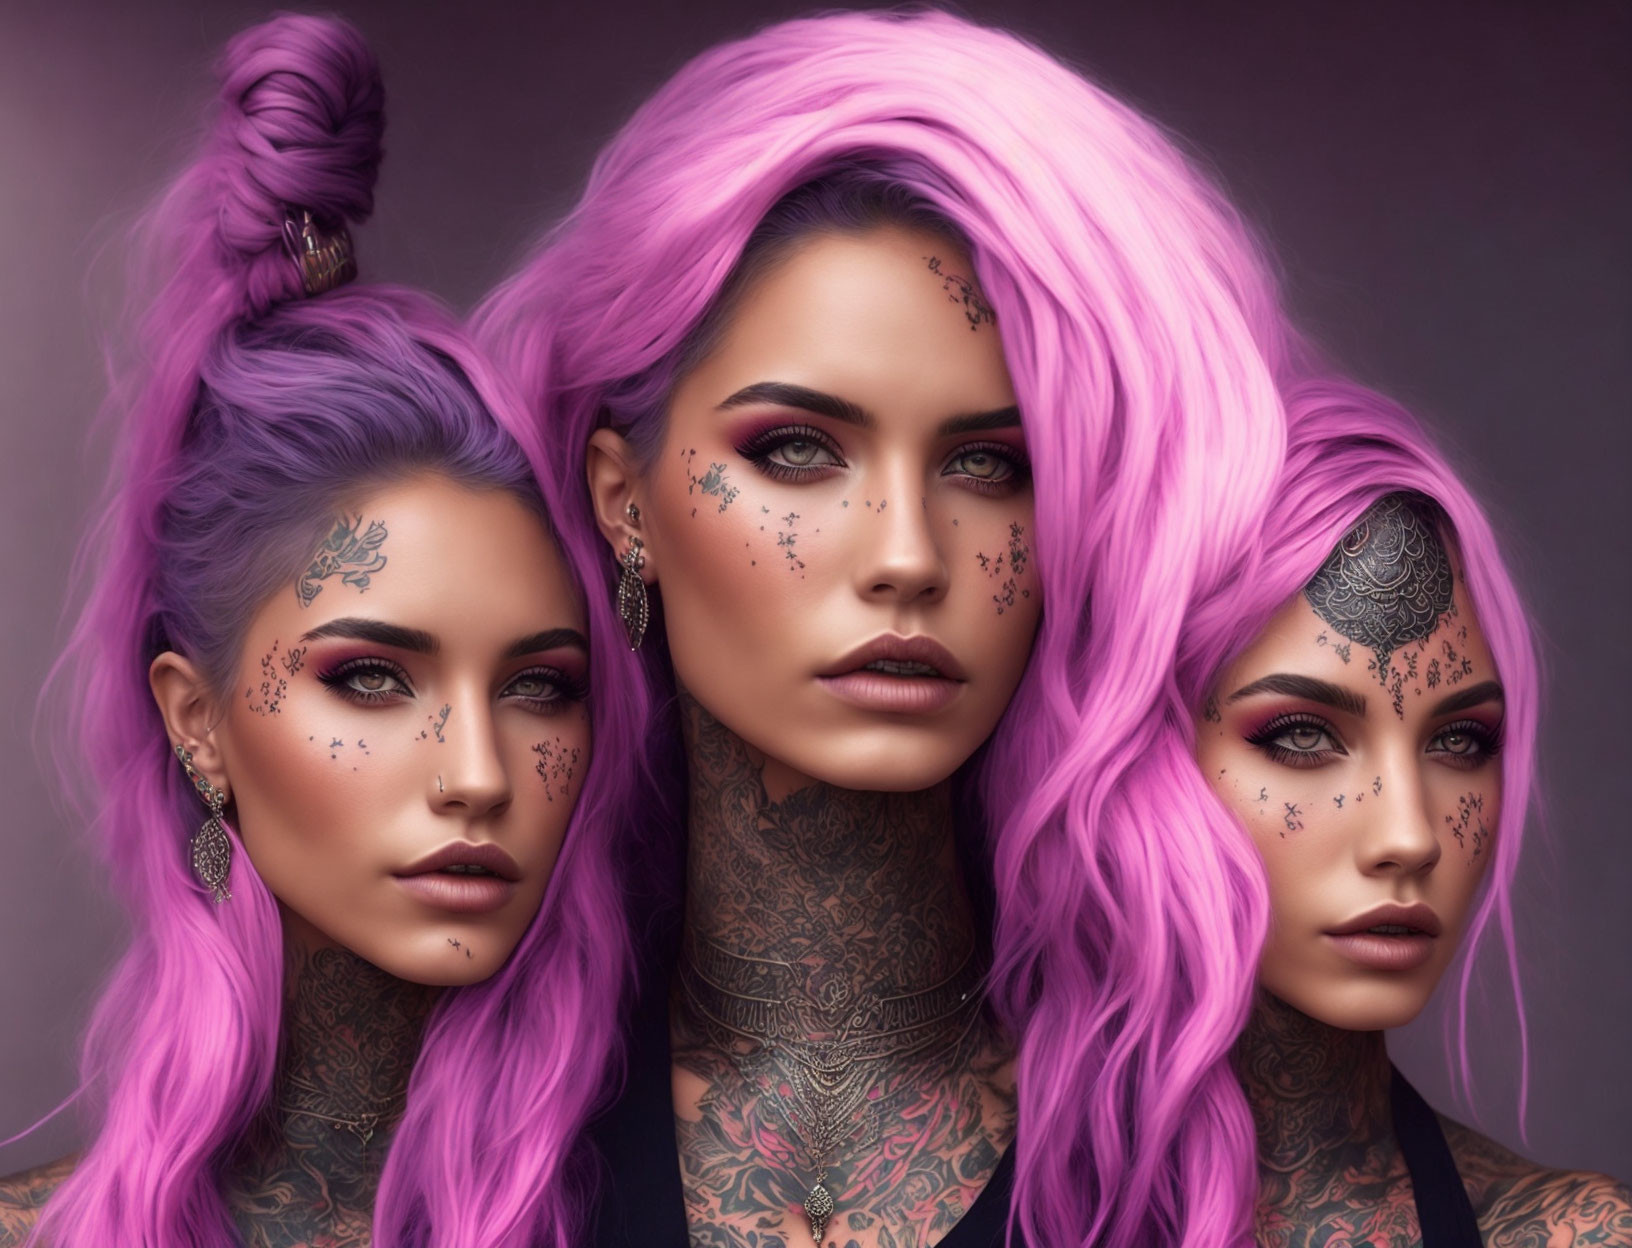 Vibrant pink hair and facial tattoos on three women with dark makeup